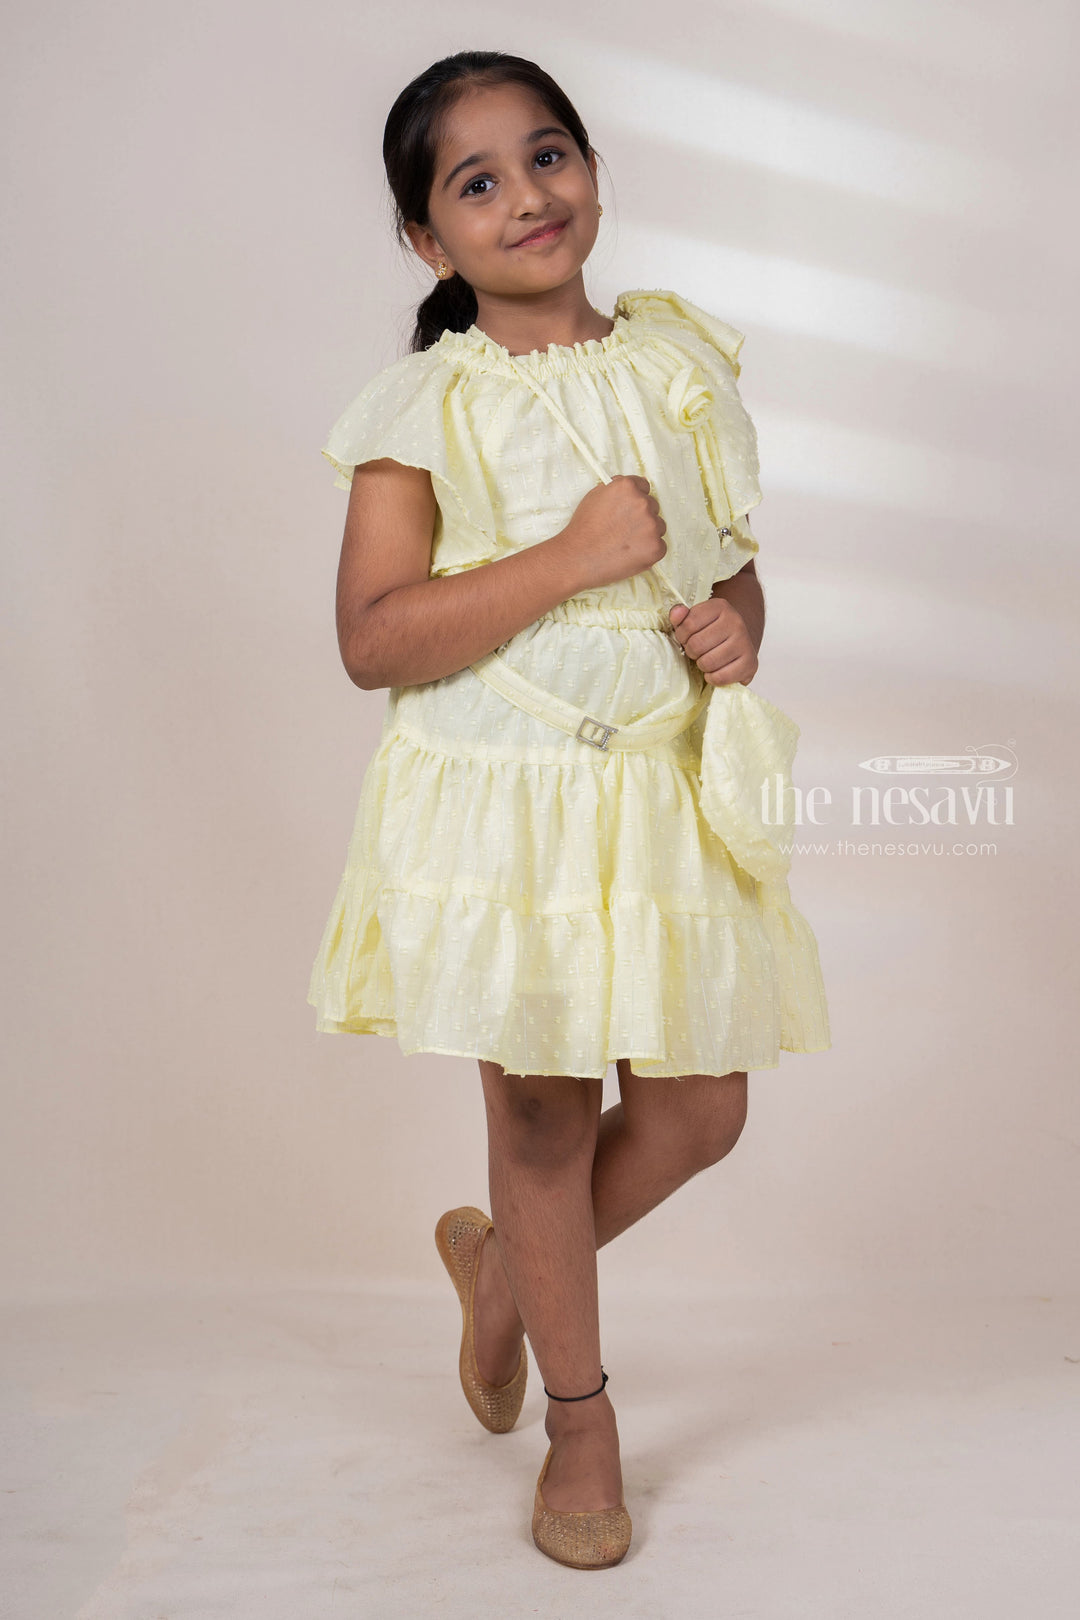 The Nesavu Frocks & Dresses Yellow Off-Shoulder Designed Soft Cotton Frock For Baby Girls With Matching Bag psr silks Nesavu 22 (4Y) / yellow GFC913A